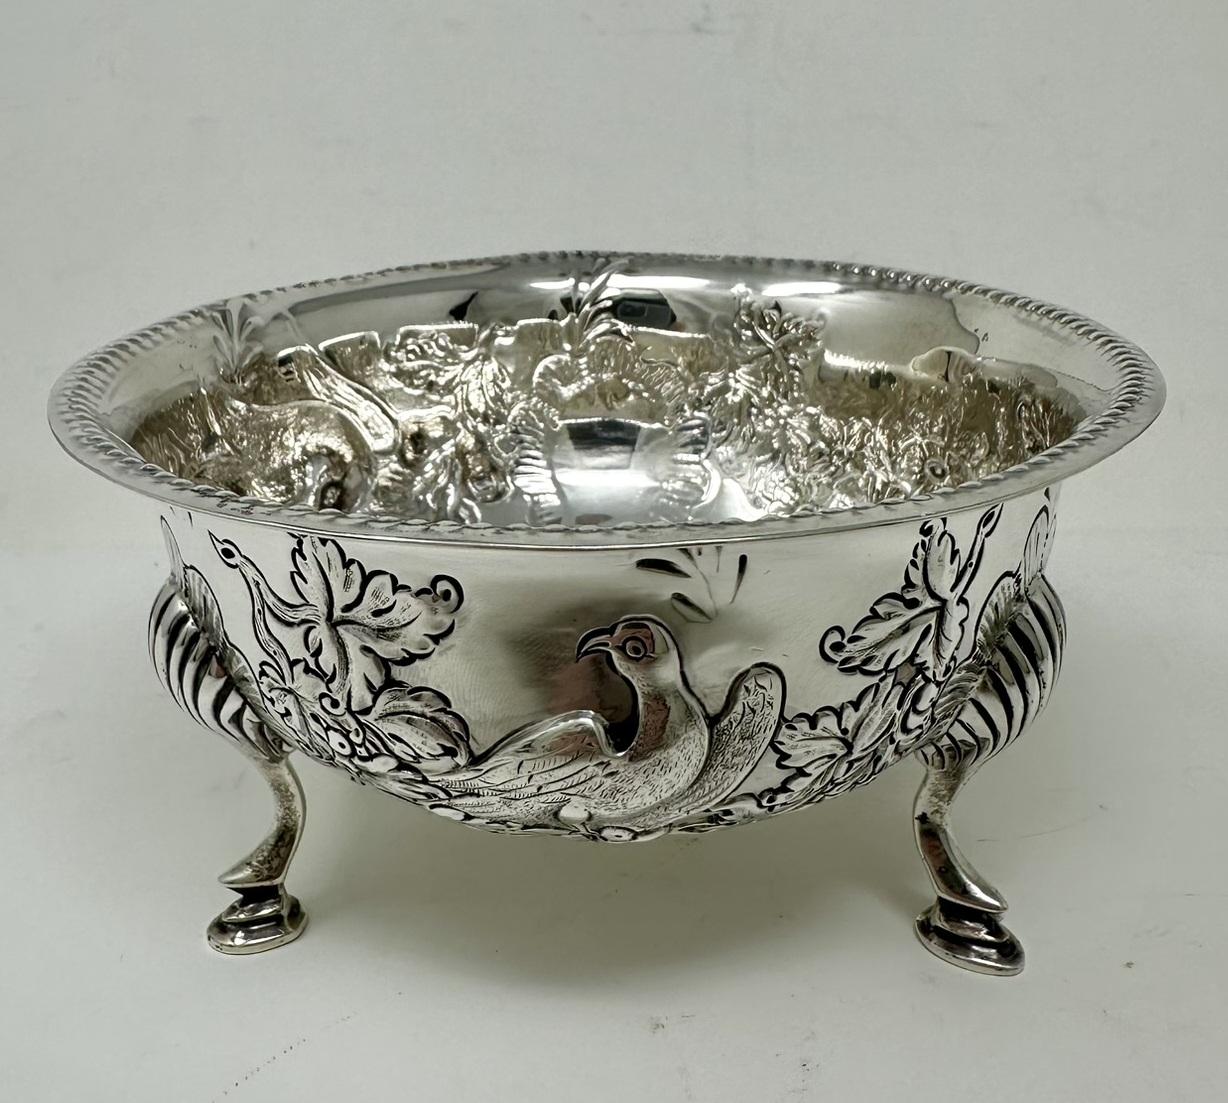 Absolutely Stunning Irish Sterling Silver Heavy Gauge Circular Edwardian Sugar Bowl of exhibition quality and generous size in superb condition 

The outturned gardooned rim above a very stylish chased body, superbly decorated depicting Doves